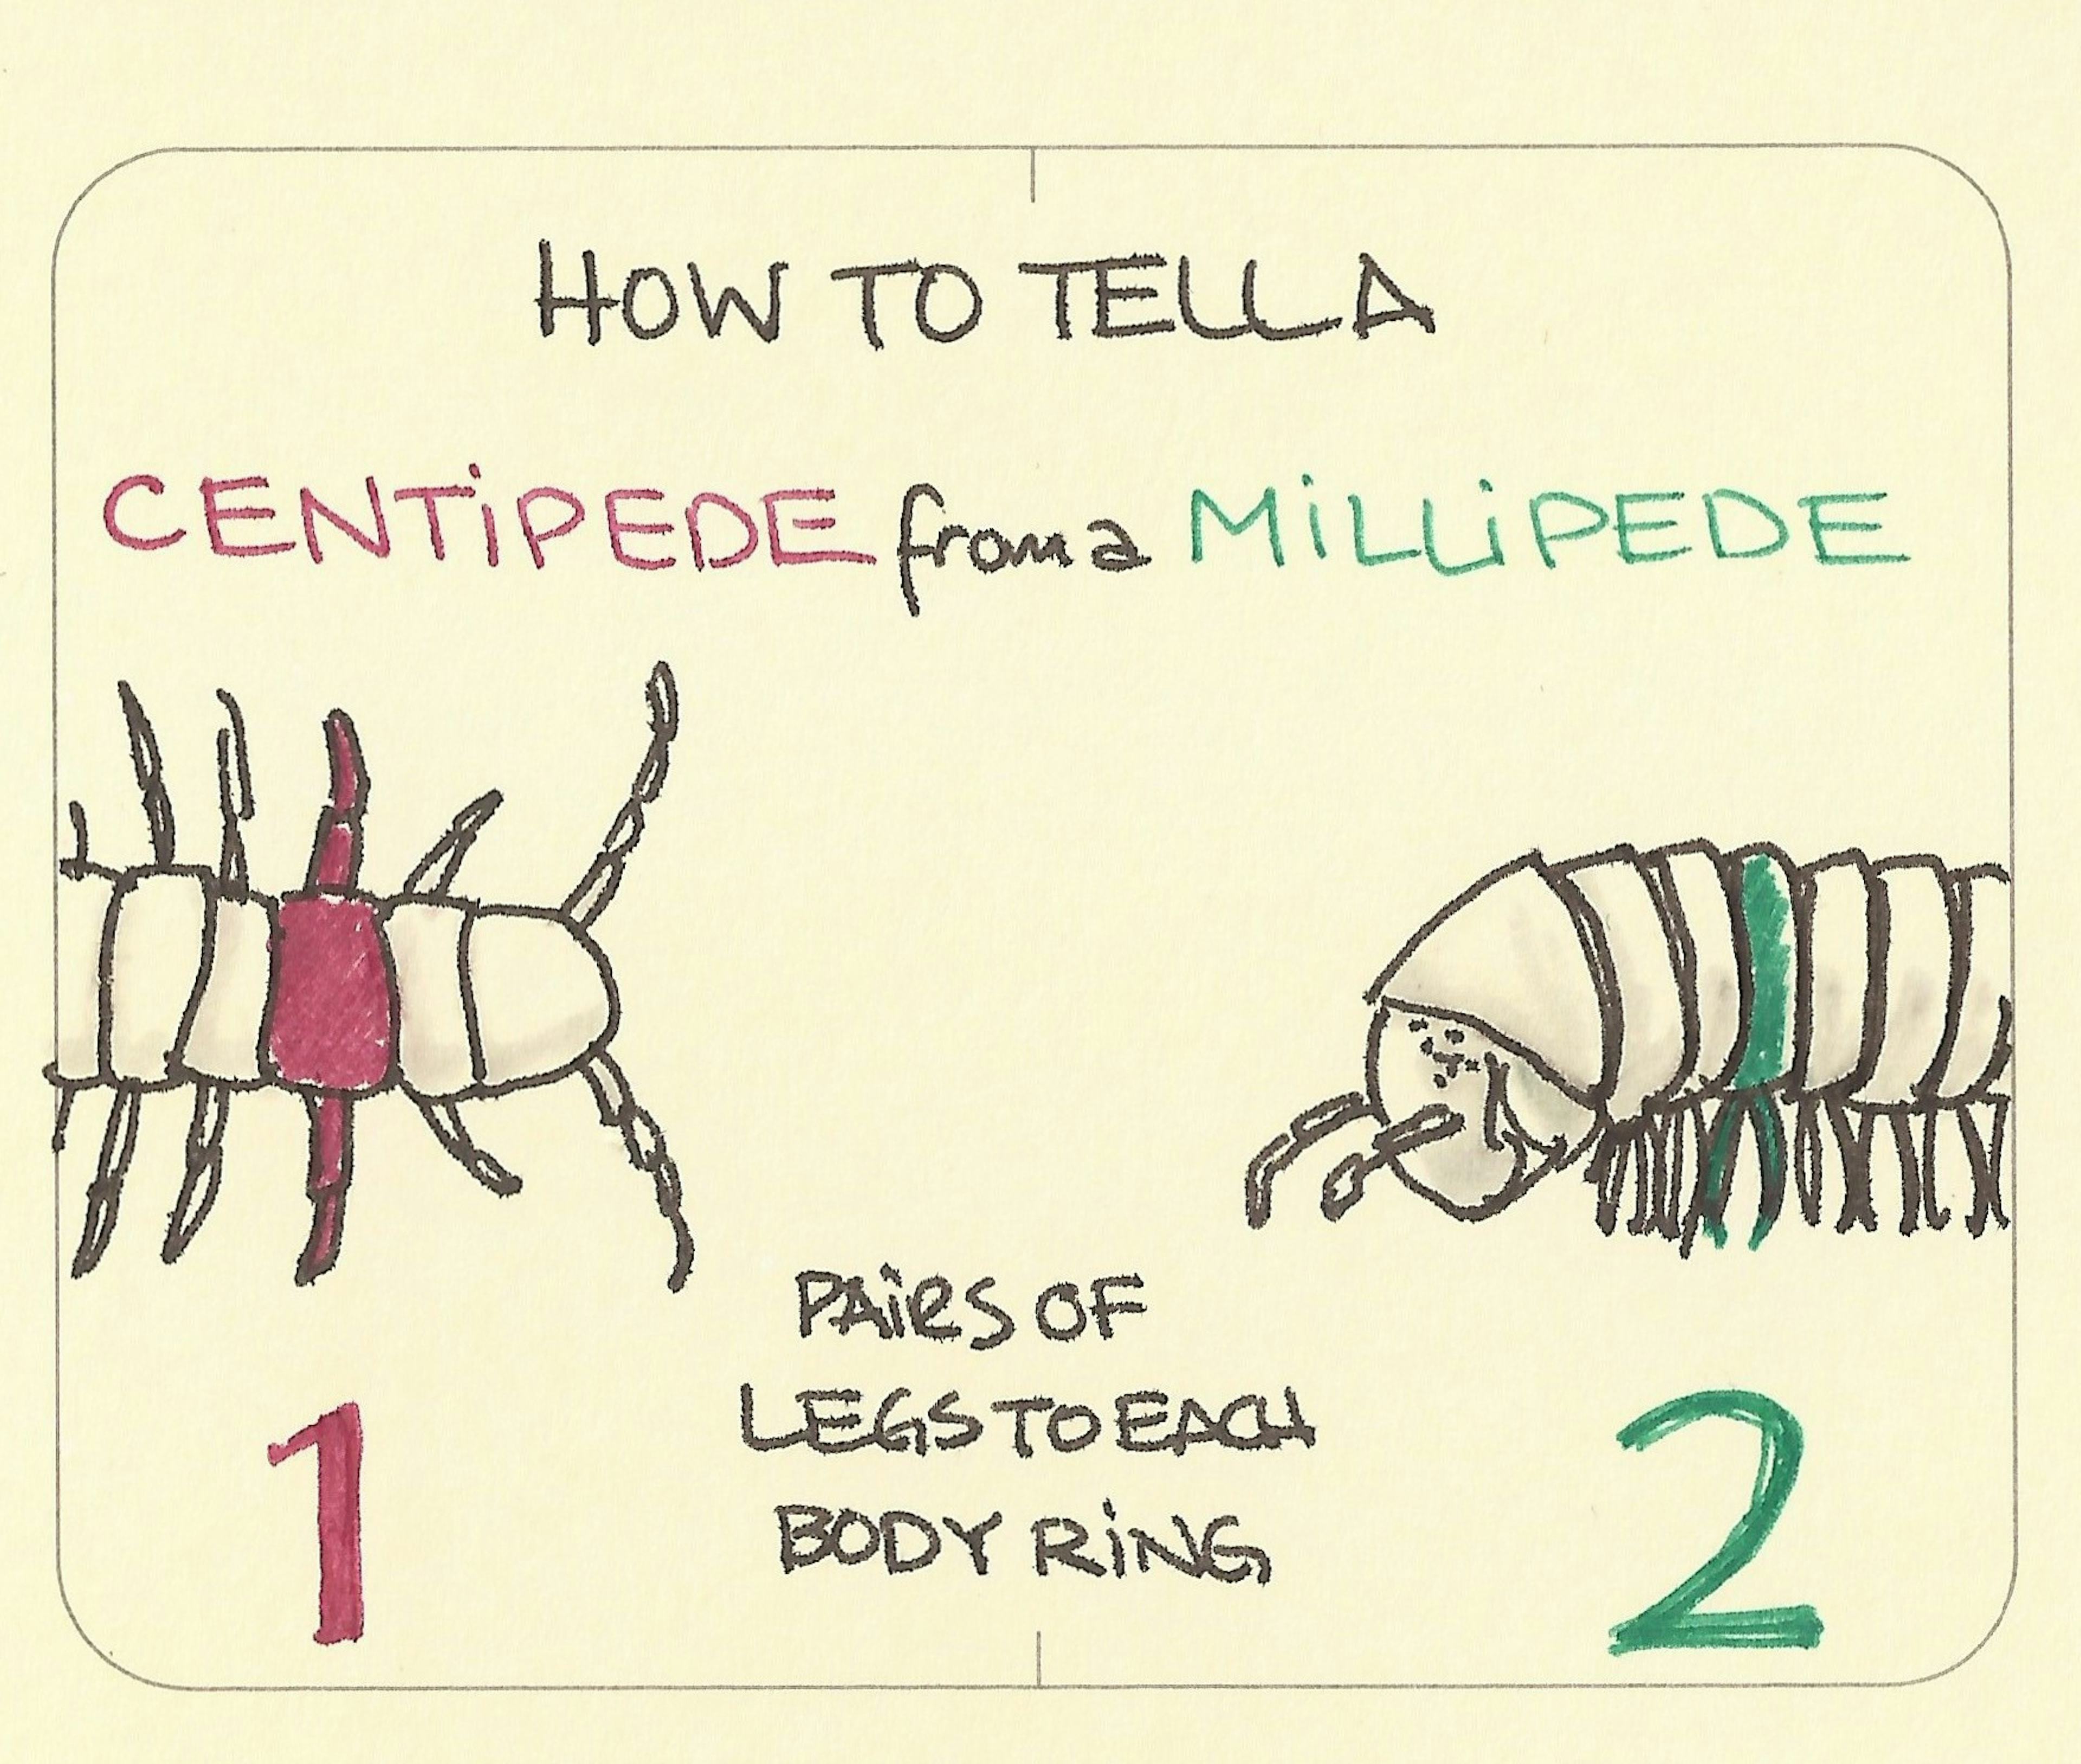 How to tell a centipede from a millipede - Sketchplanations